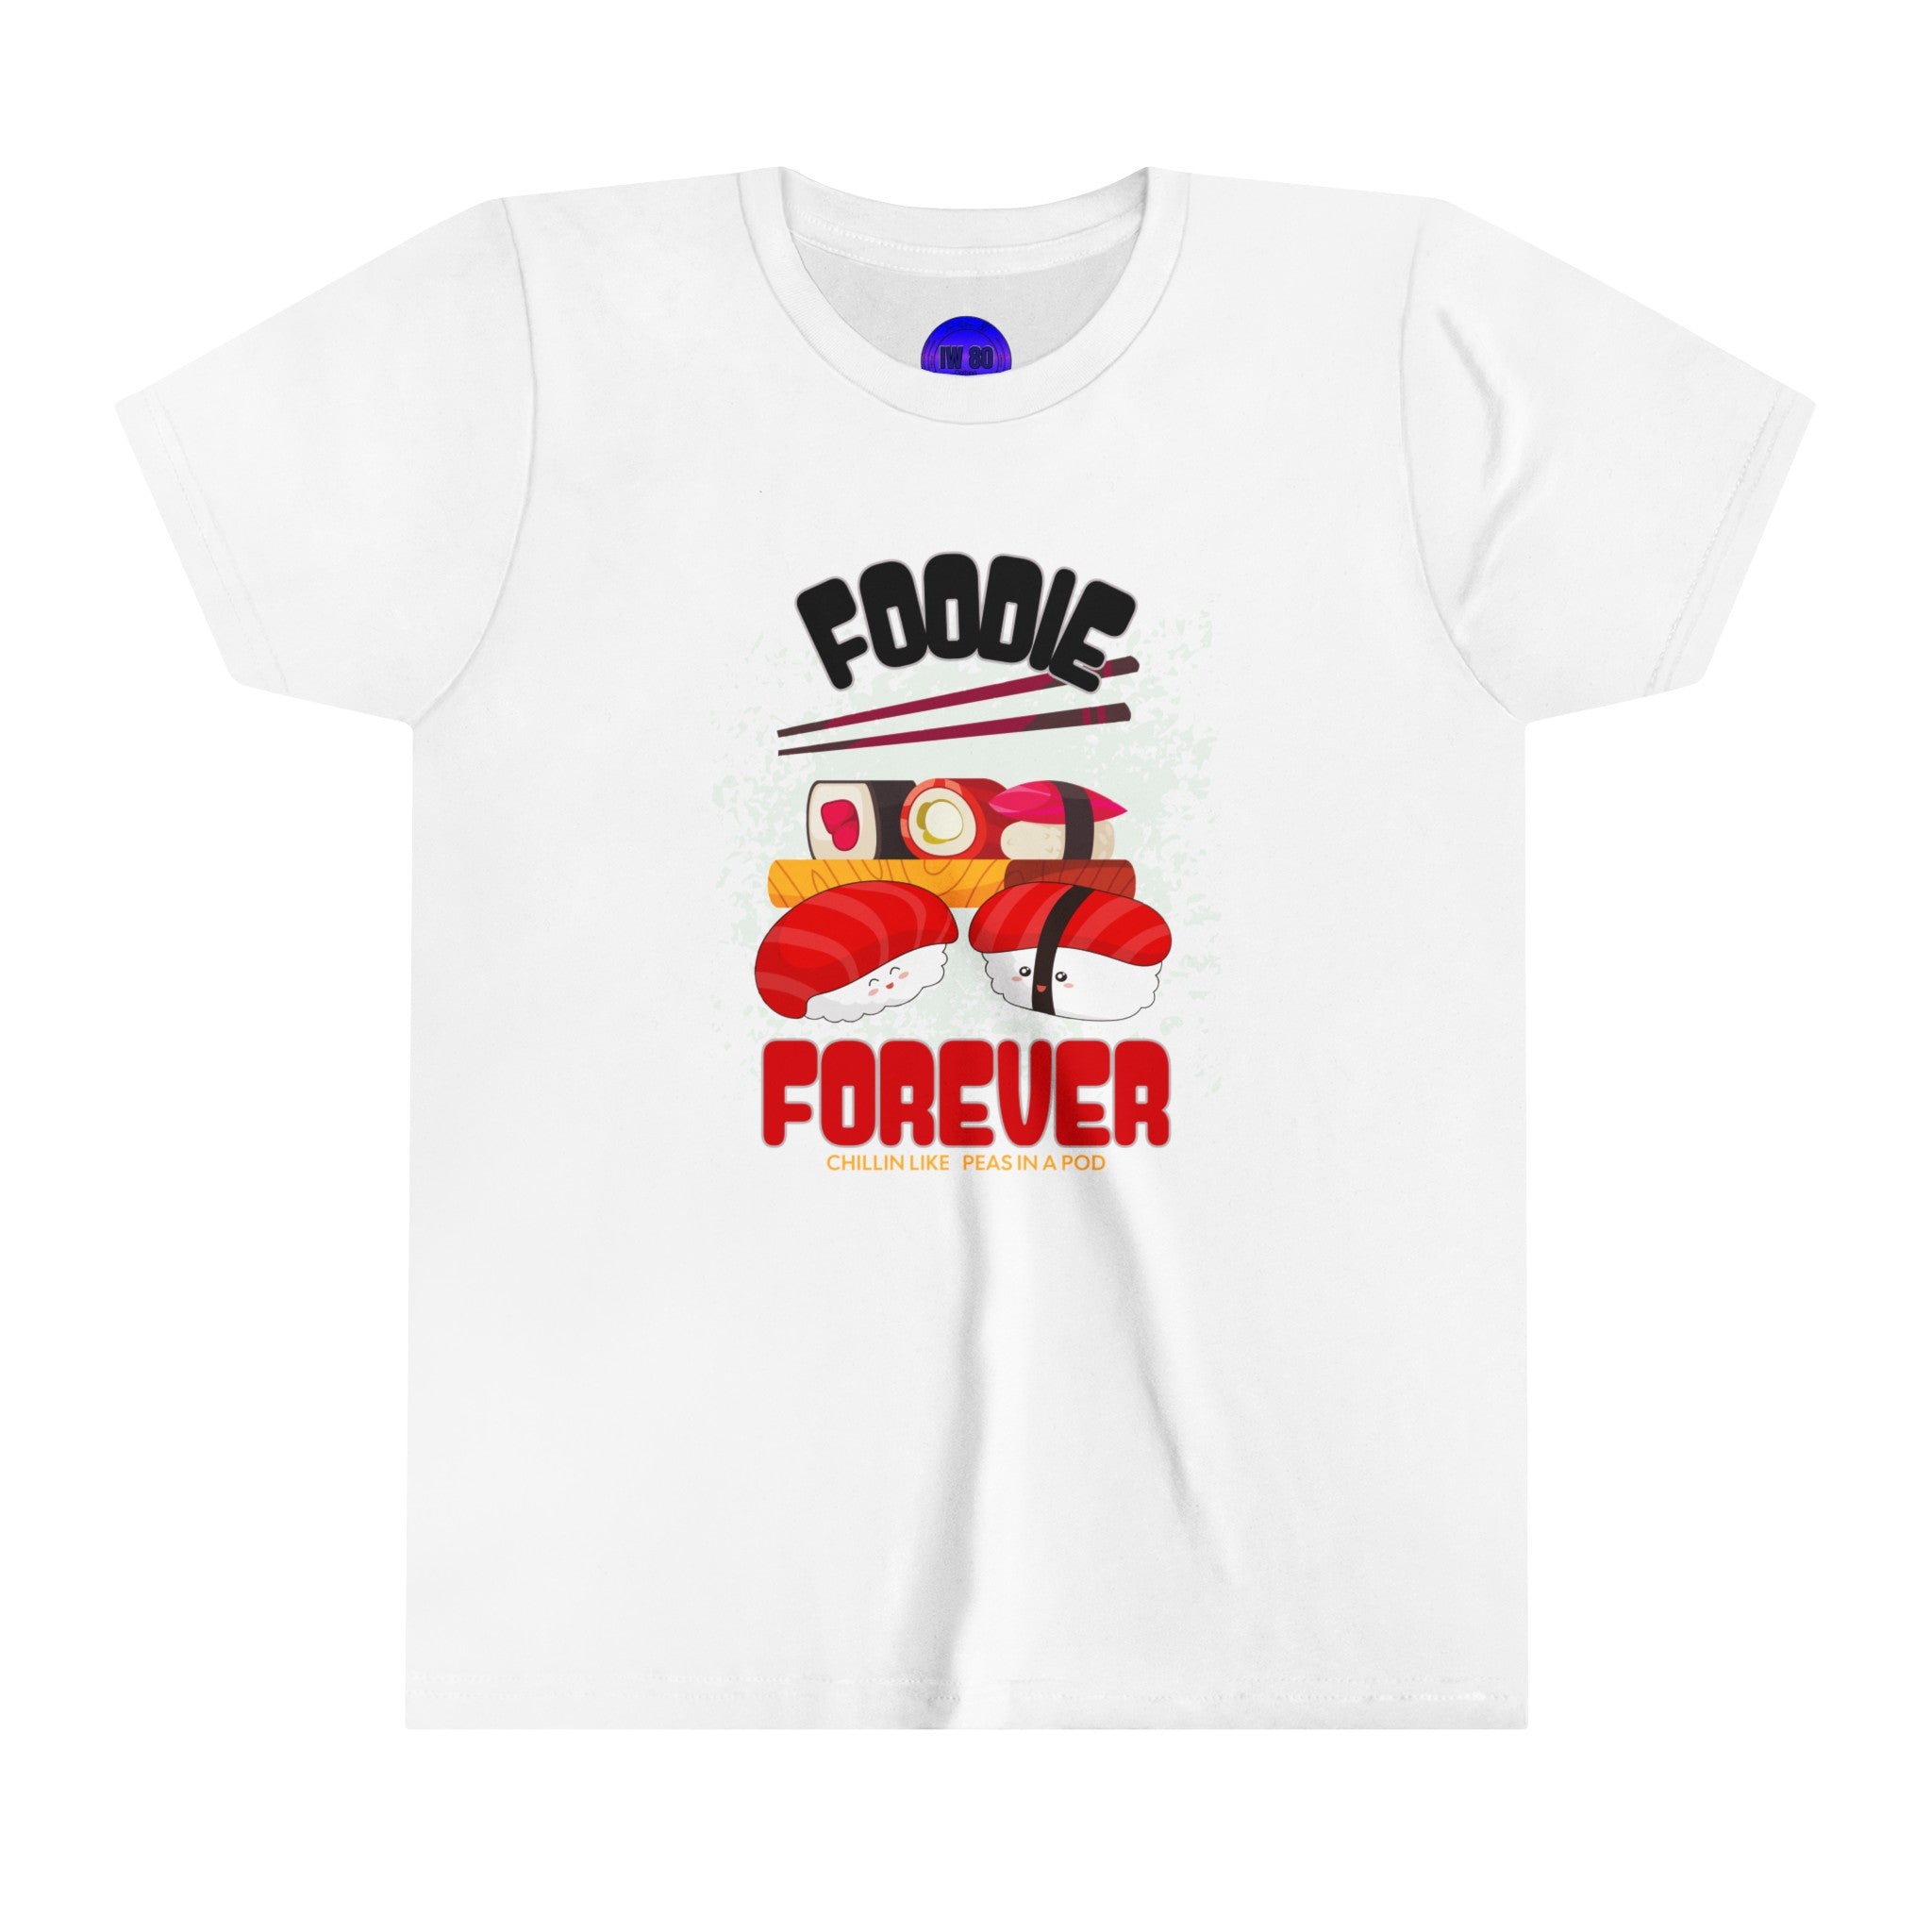 Foodie, Peas in a Pod, Cute Sushie, White, Gray, Blue, or Pink Youth Short Sleeve Tee